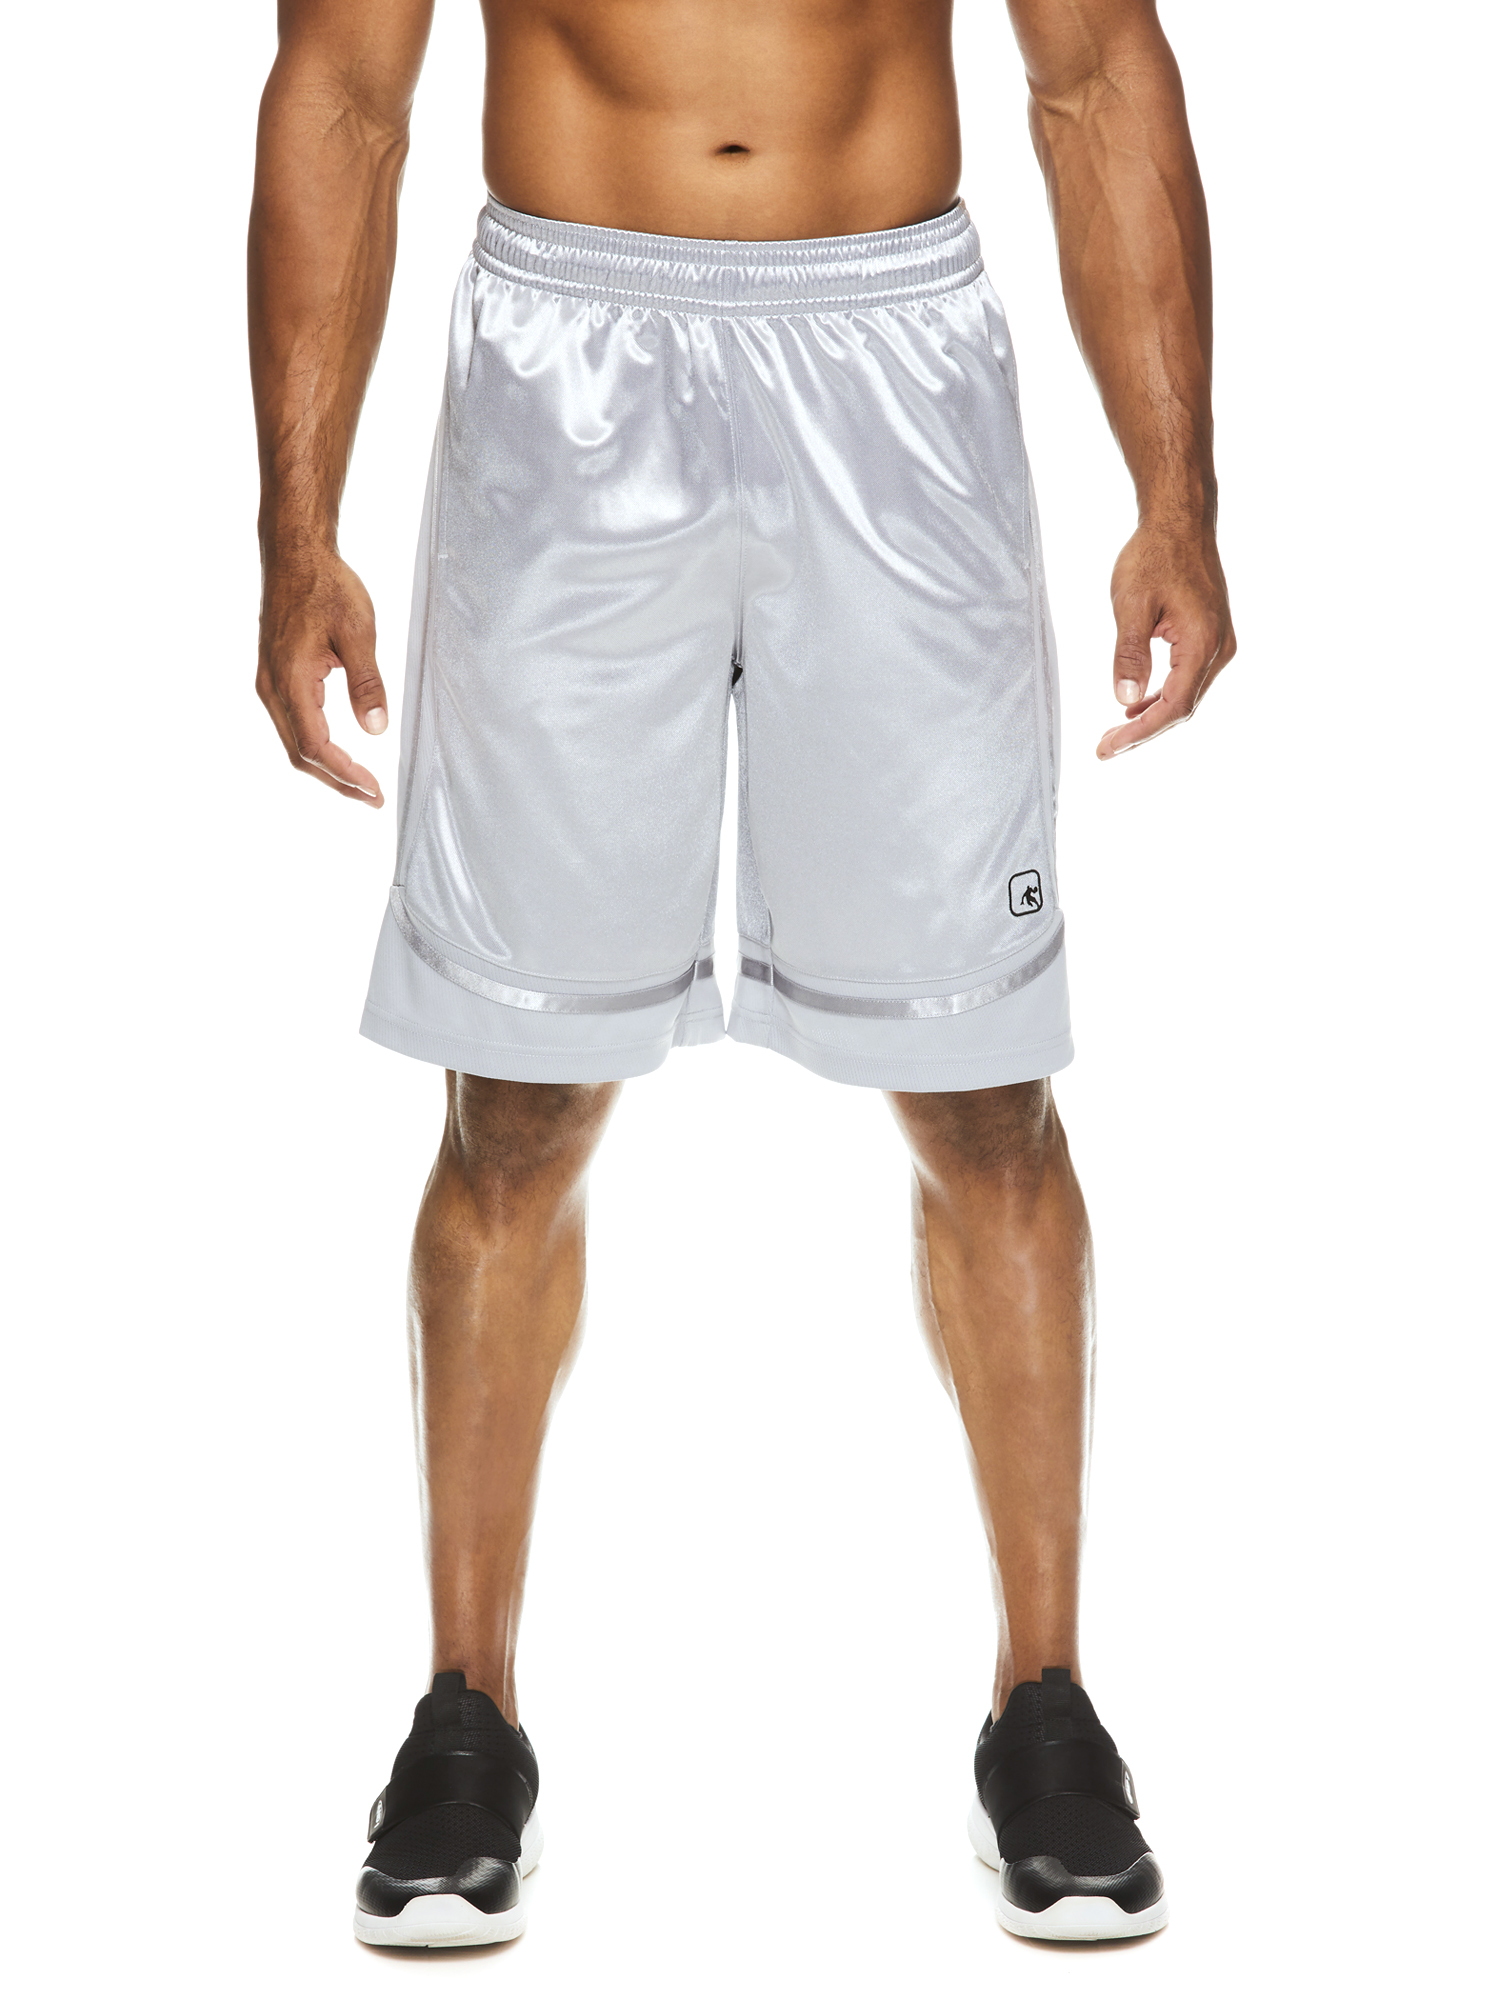 AND1 Men's and Big Men's Active Core 11" Home Court Basketball Shorts, Sizes S-5XL - image 1 of 4